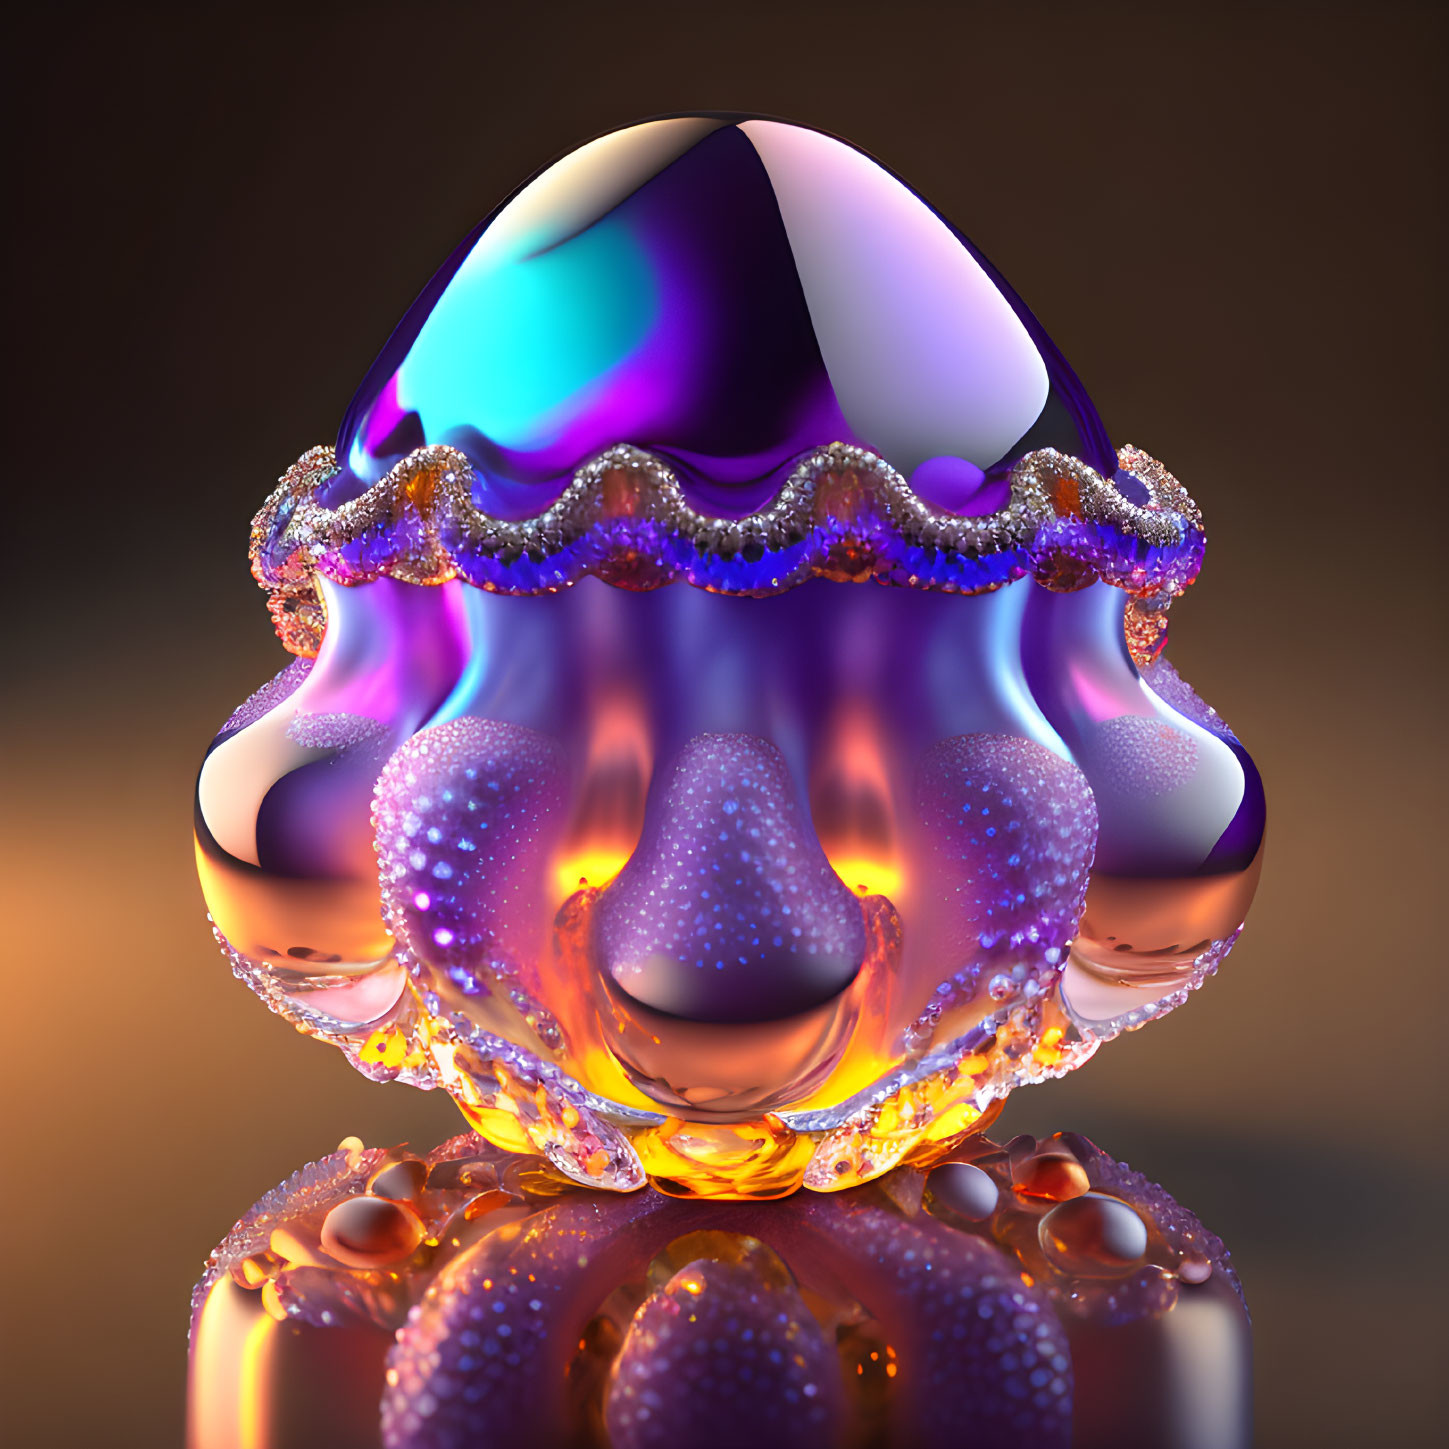 Iridescent jellyfish-like object with pearl-adorned top on amber backdrop